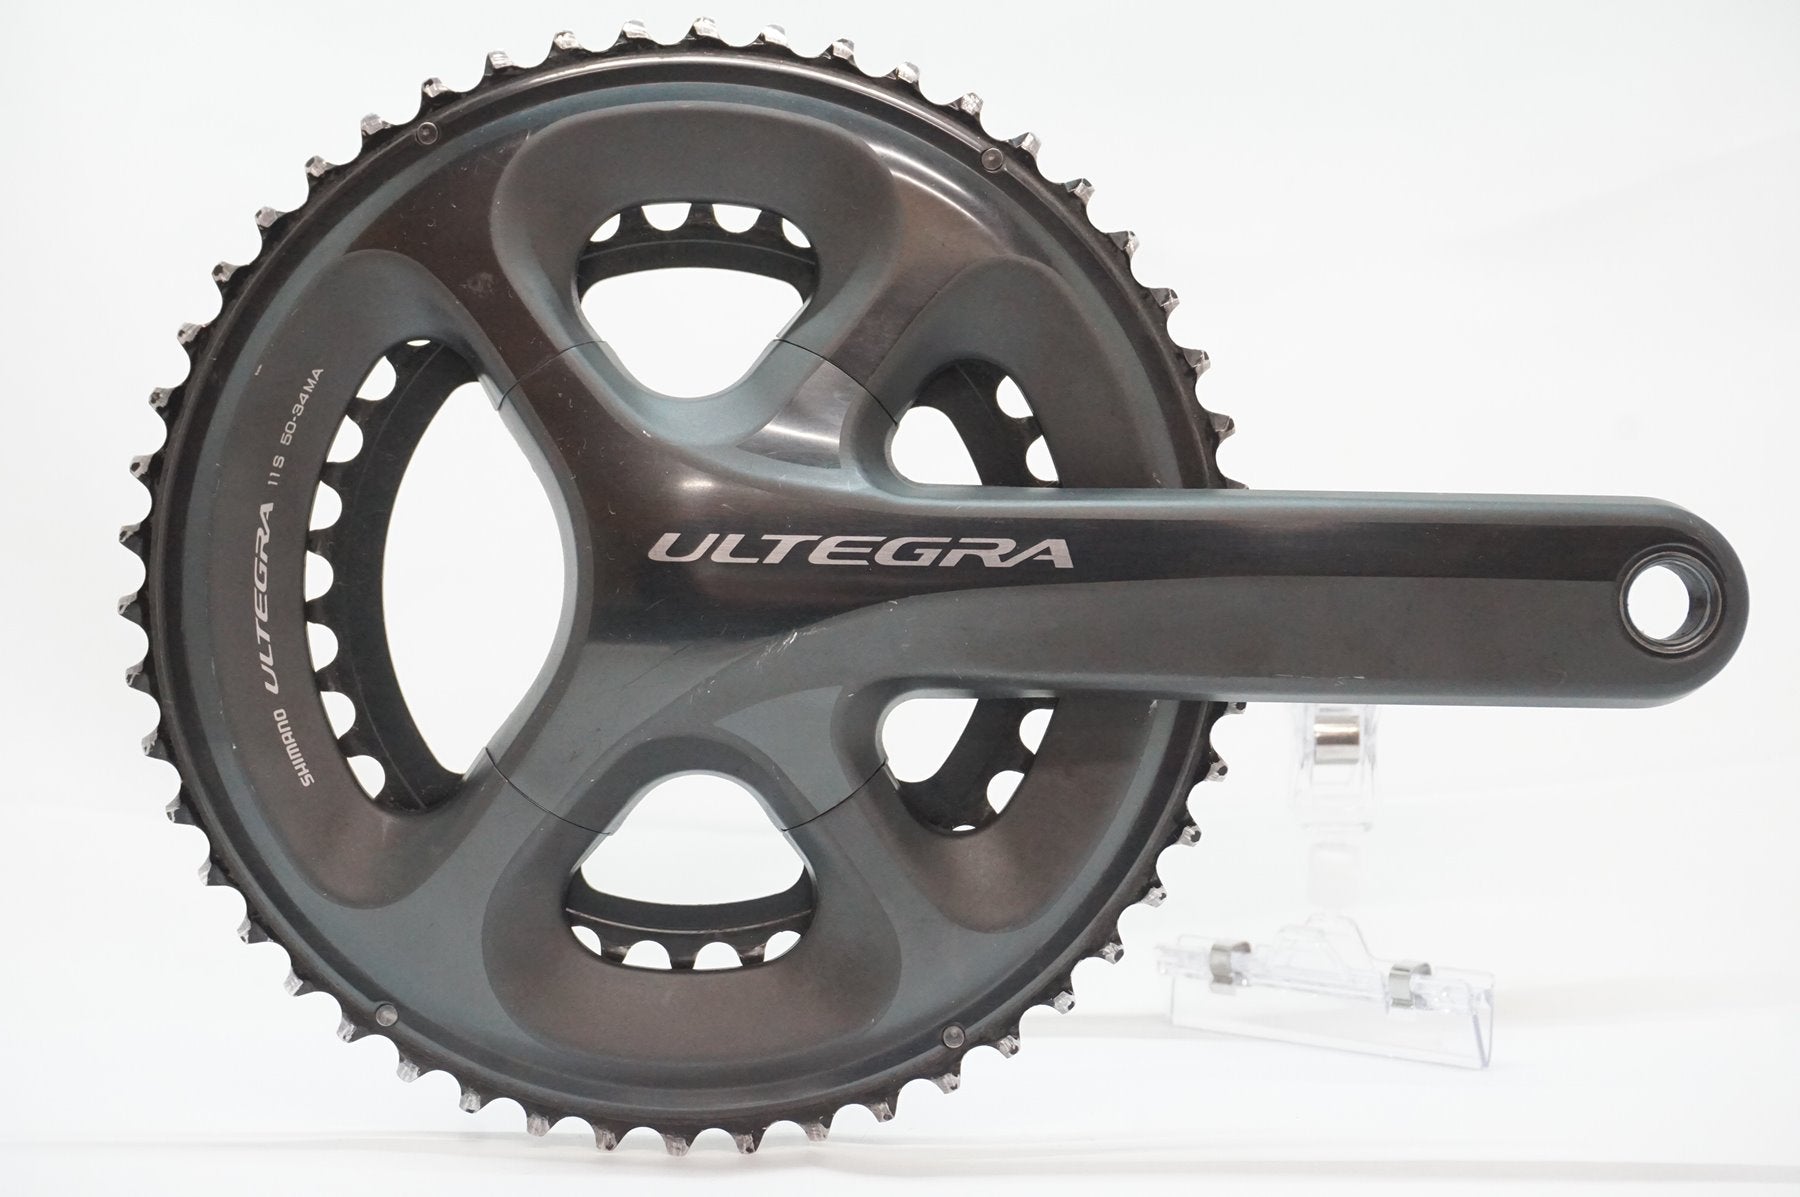 SHIMANO 「シマノ」 ULTEGRA FC-6800 50-34T 170mm STAGES パワーメーター付 クランクセット / 宇都宮店